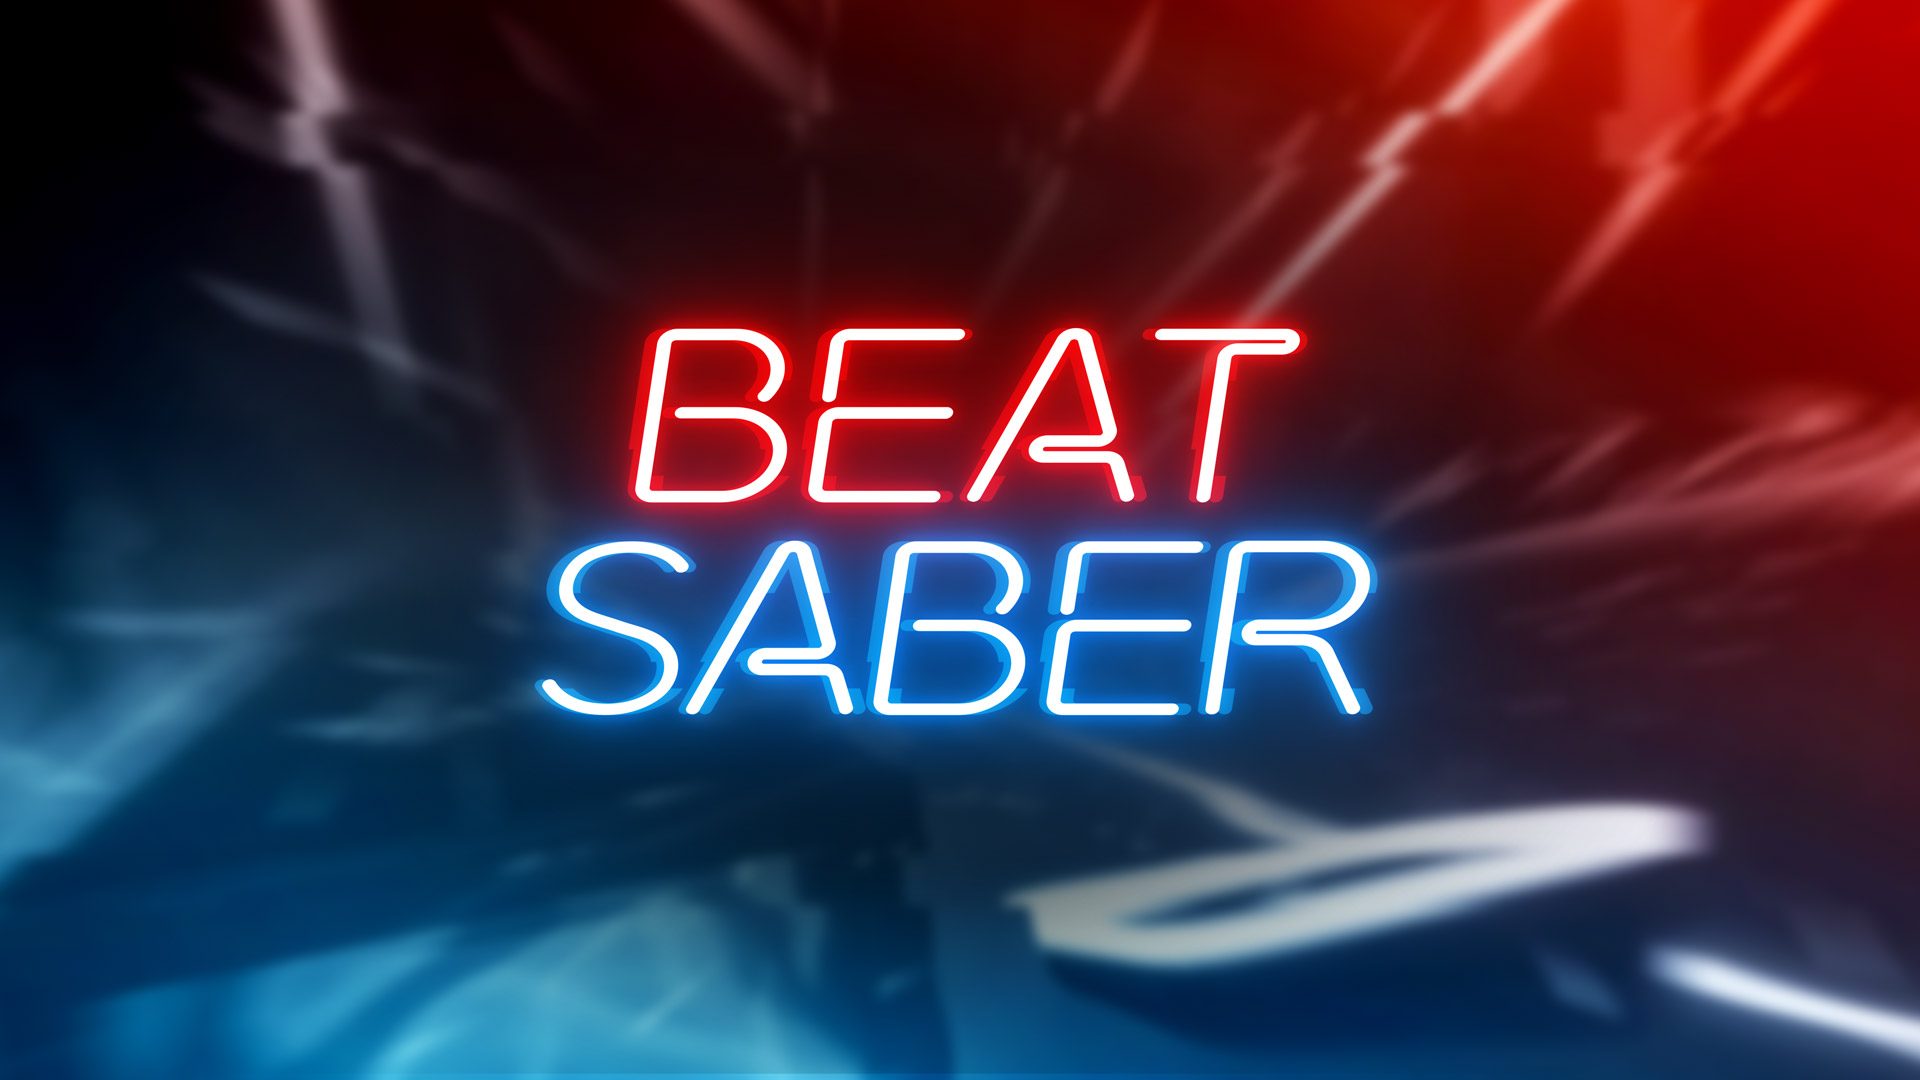 After Building One of VR’s Most Successful Games, ‘Beat Saber’ Founder Plans to Take a Break from VR